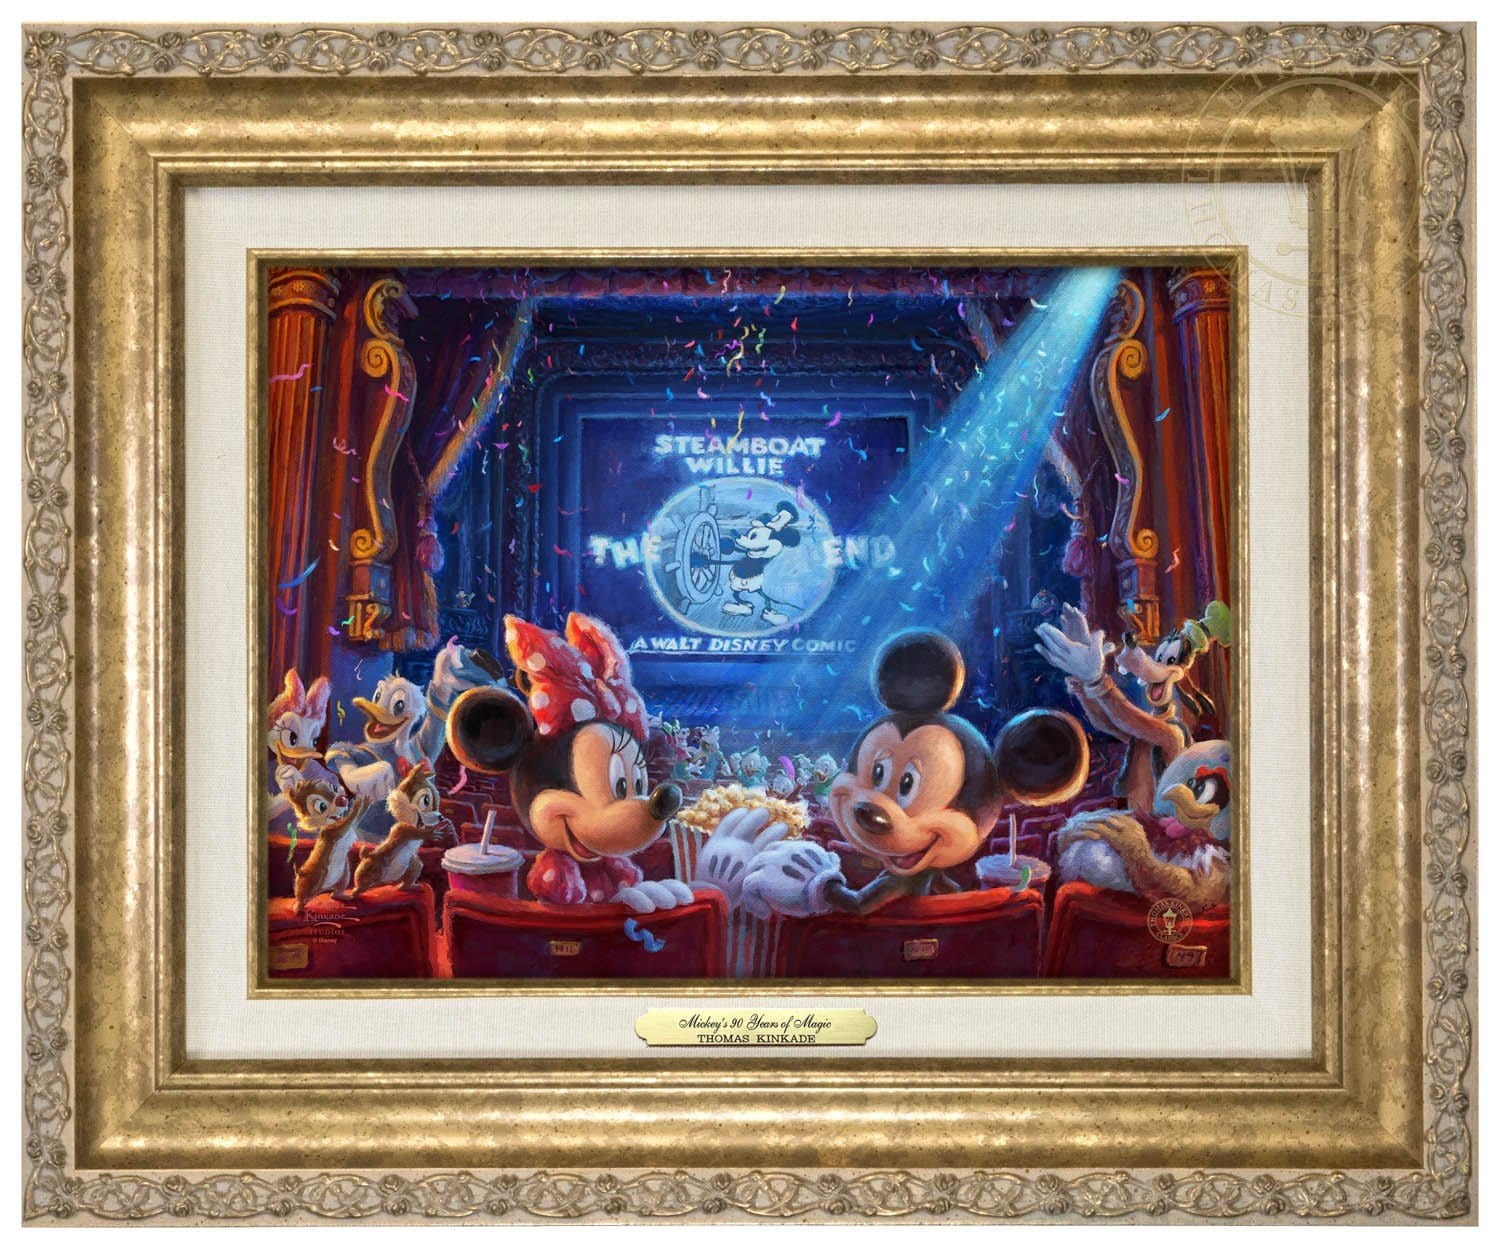 Minnie Mouse, Mickey Mouse’s original co-star from Steamboat Willie, has invited some of their most treasured friends to celebrate the film’s 90th anniversary - Antique Gold Frame